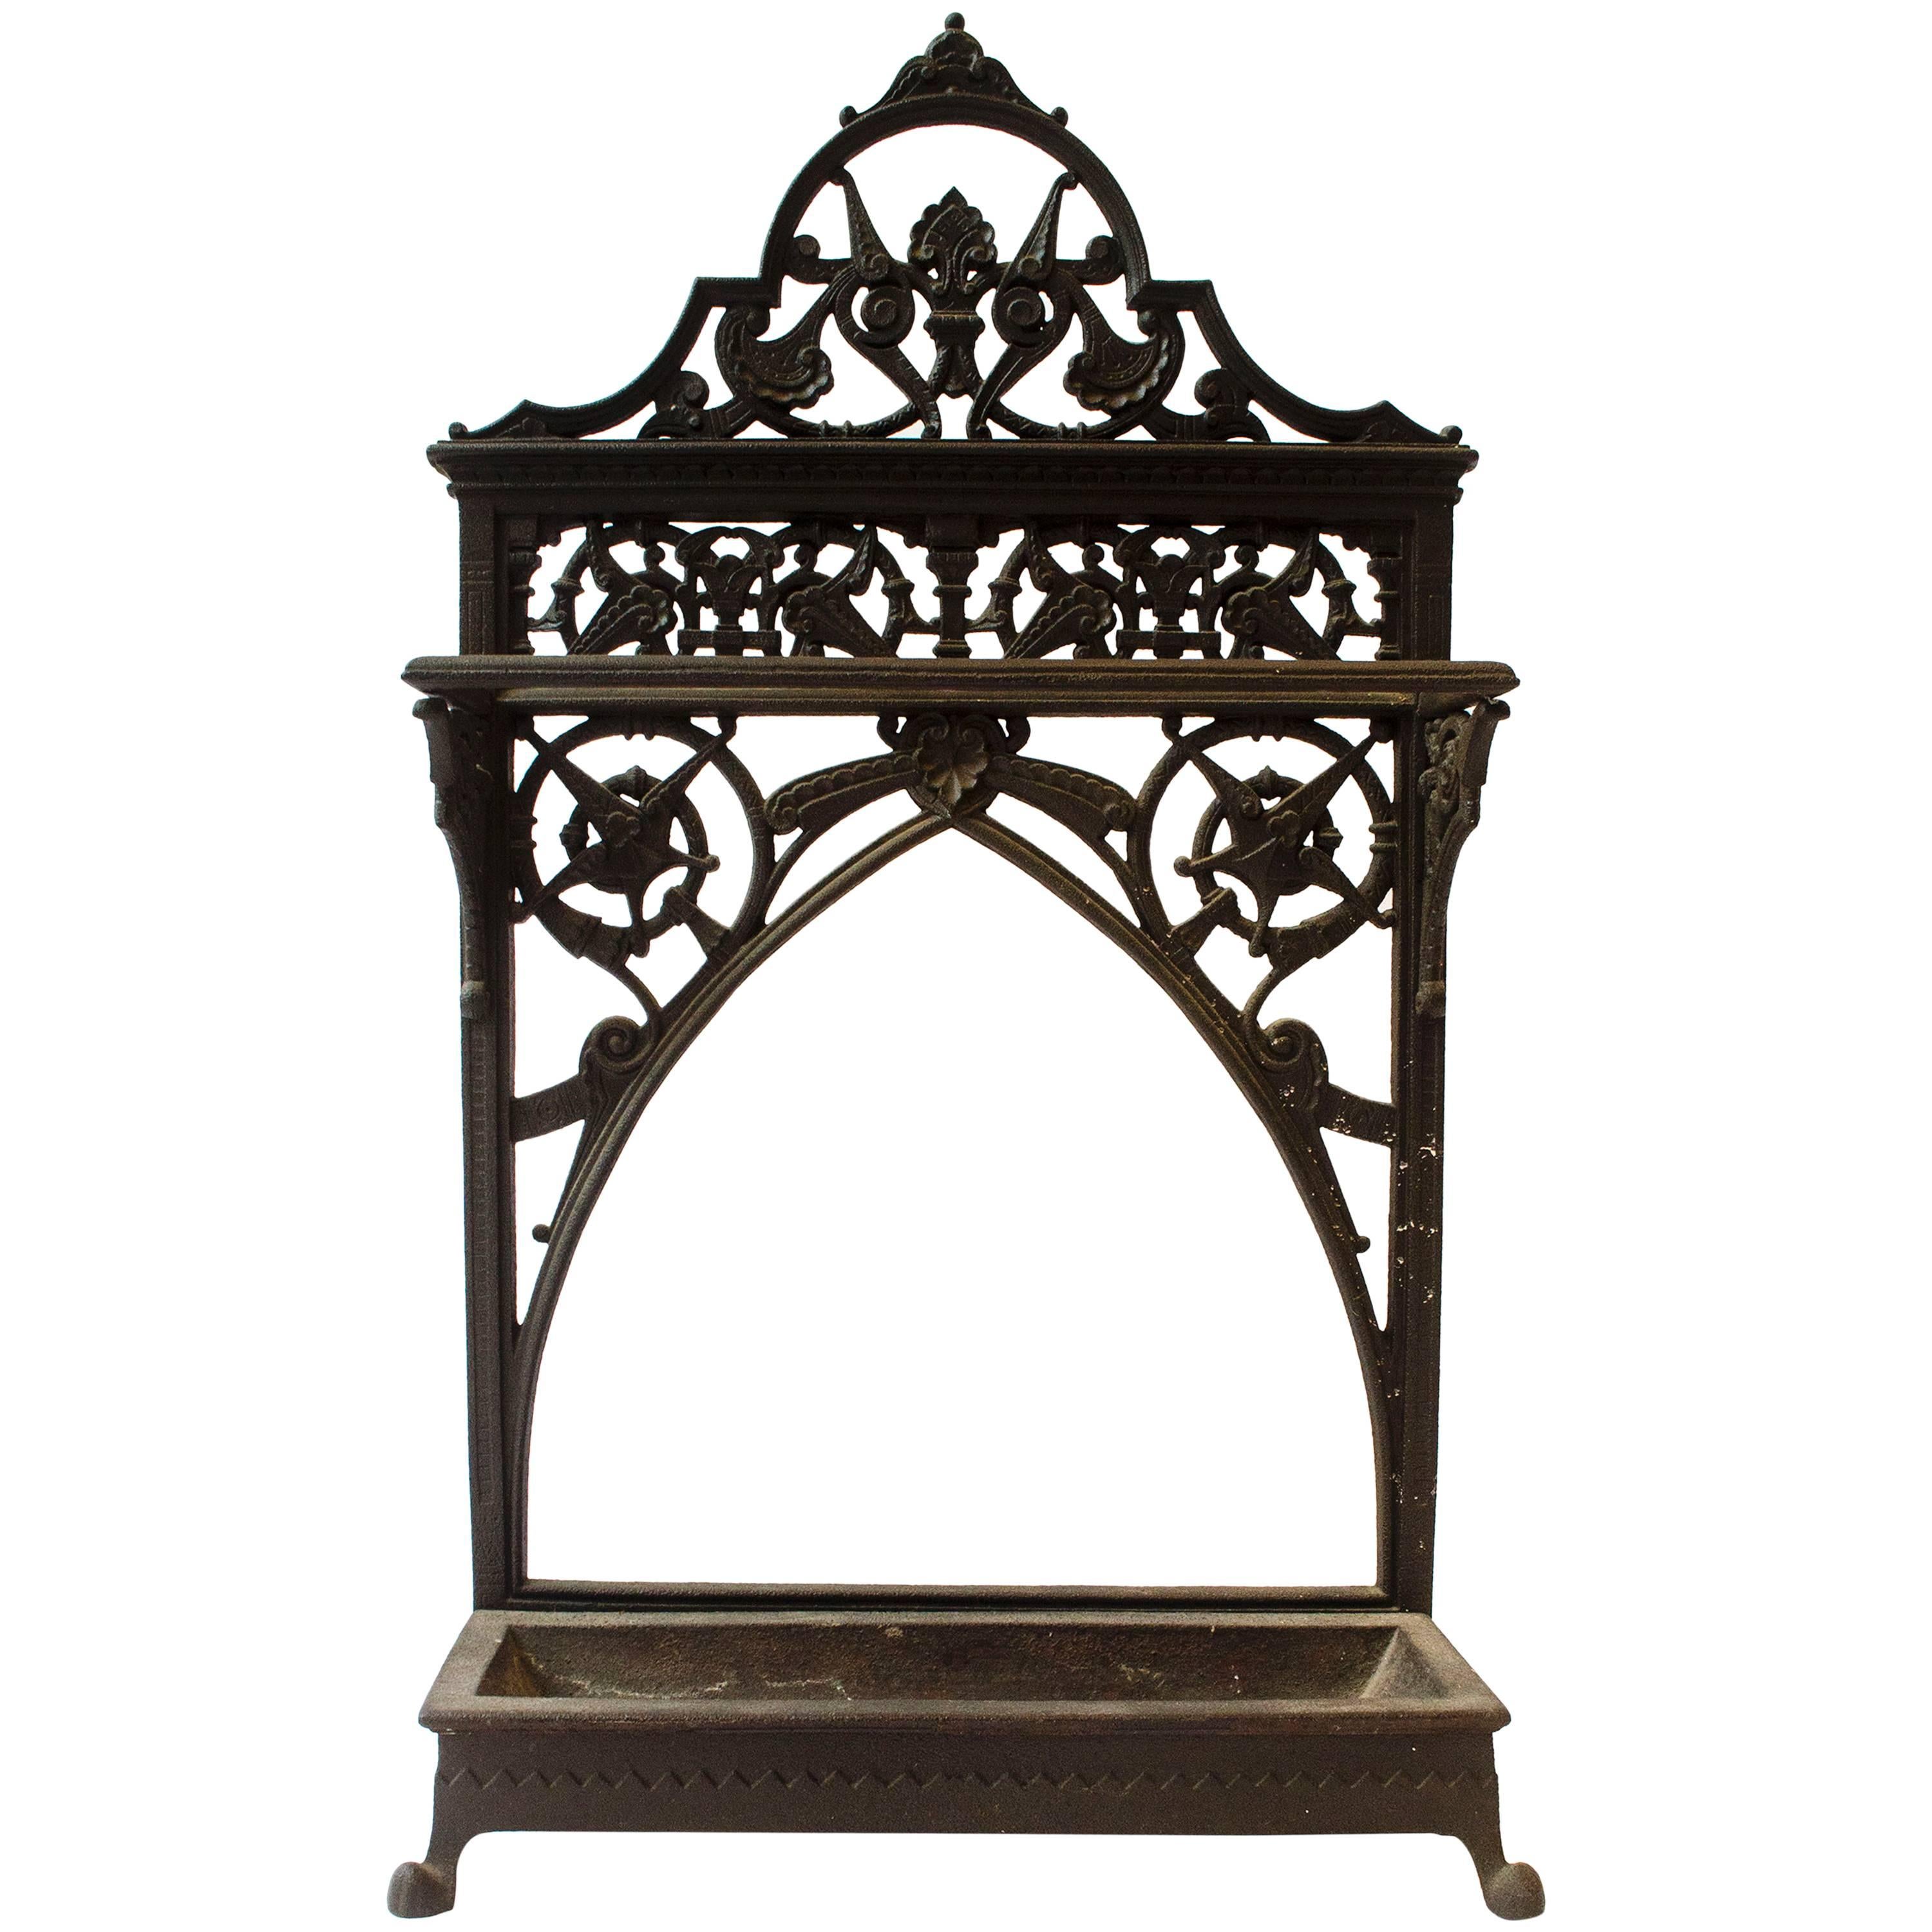 Dr C Dresser An Aesthetic Movement Cast Iron Stick Stand Made By Coalbrookdale For Sale